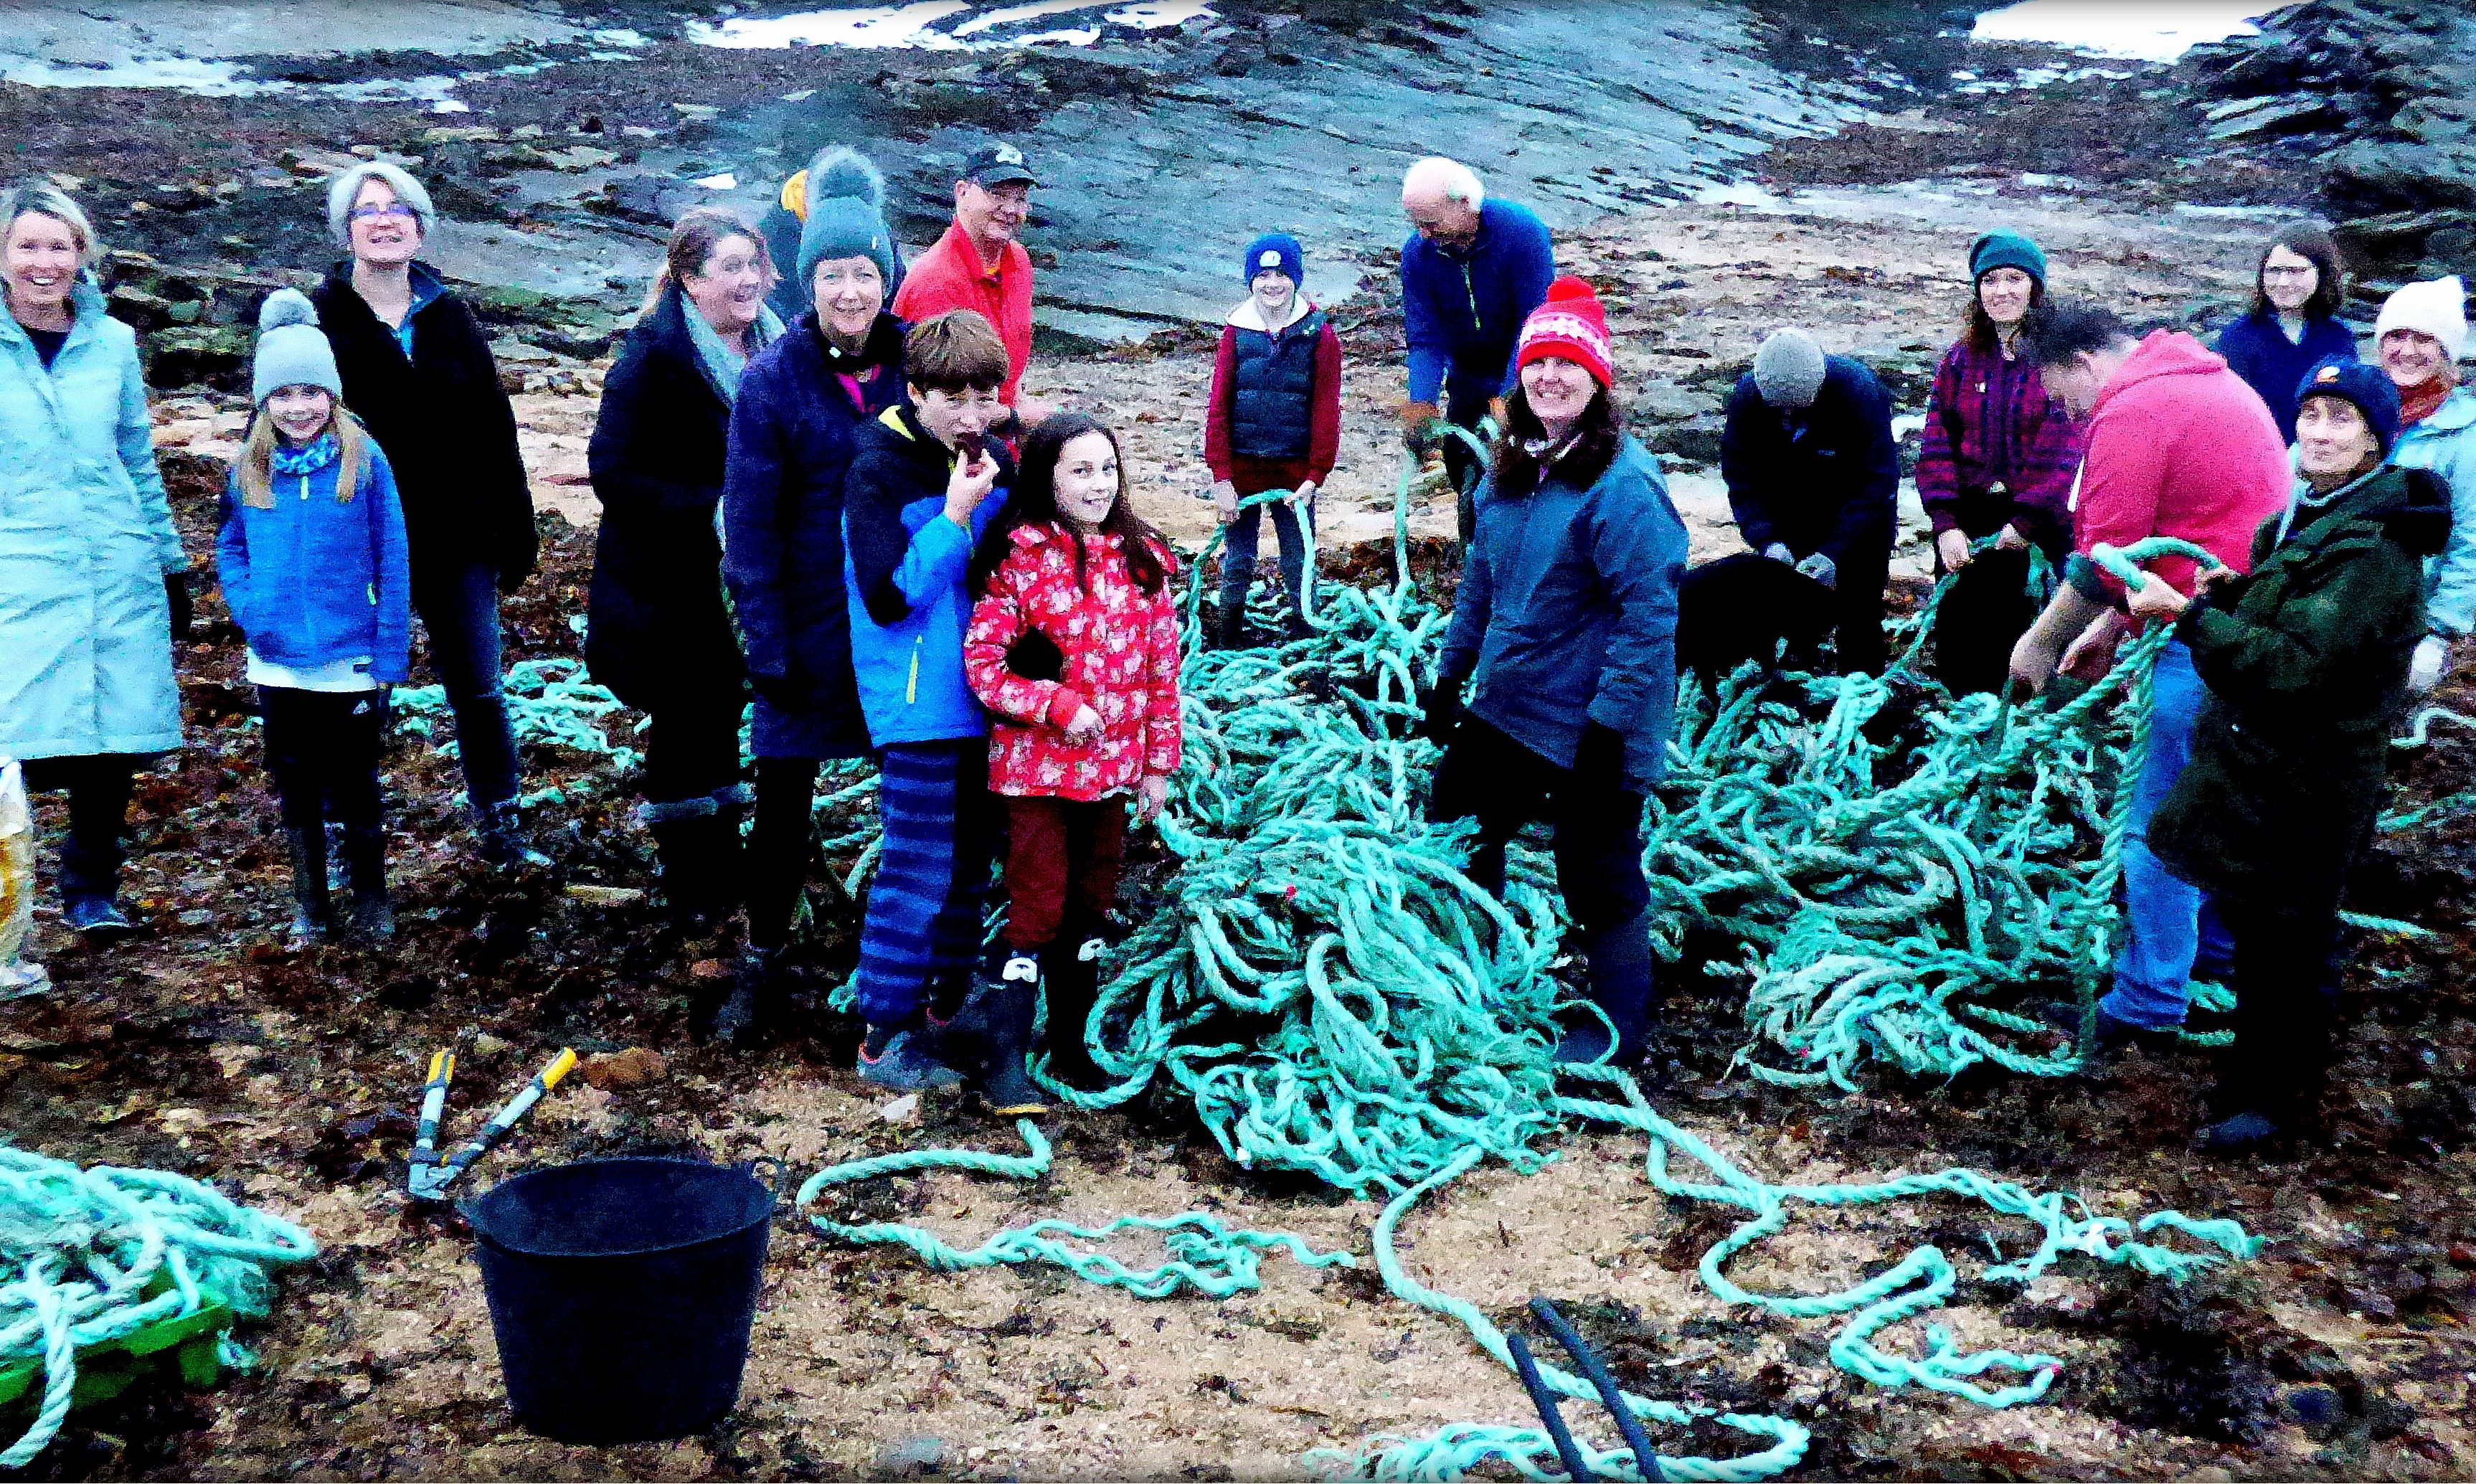 Volunteers filled a skip with litter and fishing debris from the beach near Crail